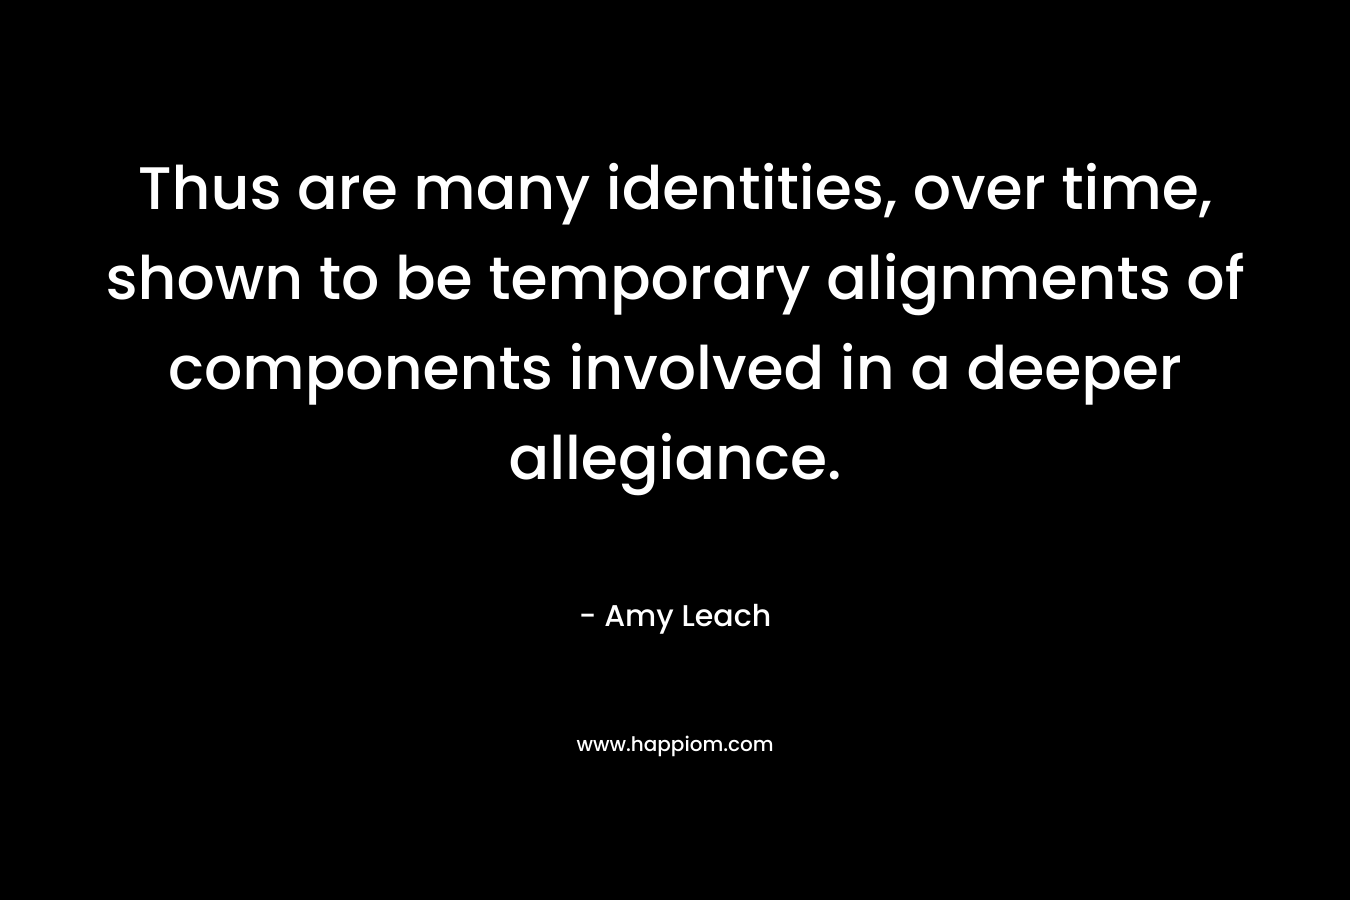 Thus are many identities, over time, shown to be temporary alignments of components involved in a deeper allegiance. – Amy Leach